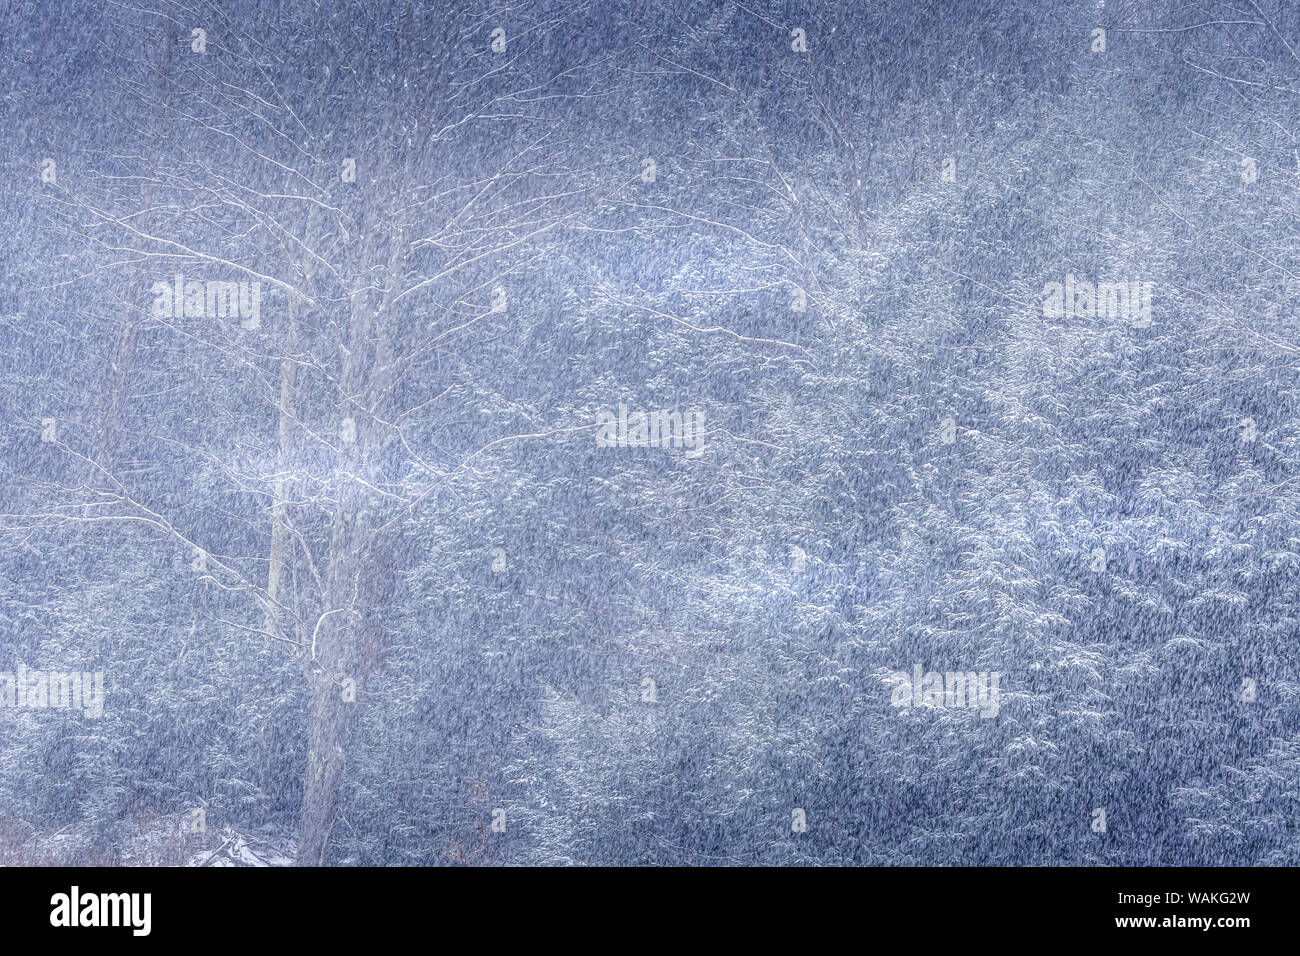 USA, Pennsylvania, Shunk. Abstract of forest in winter. Credit as: Jay O'Brien / Jaynes Gallery / DanitaDelimont.com Stock Photo